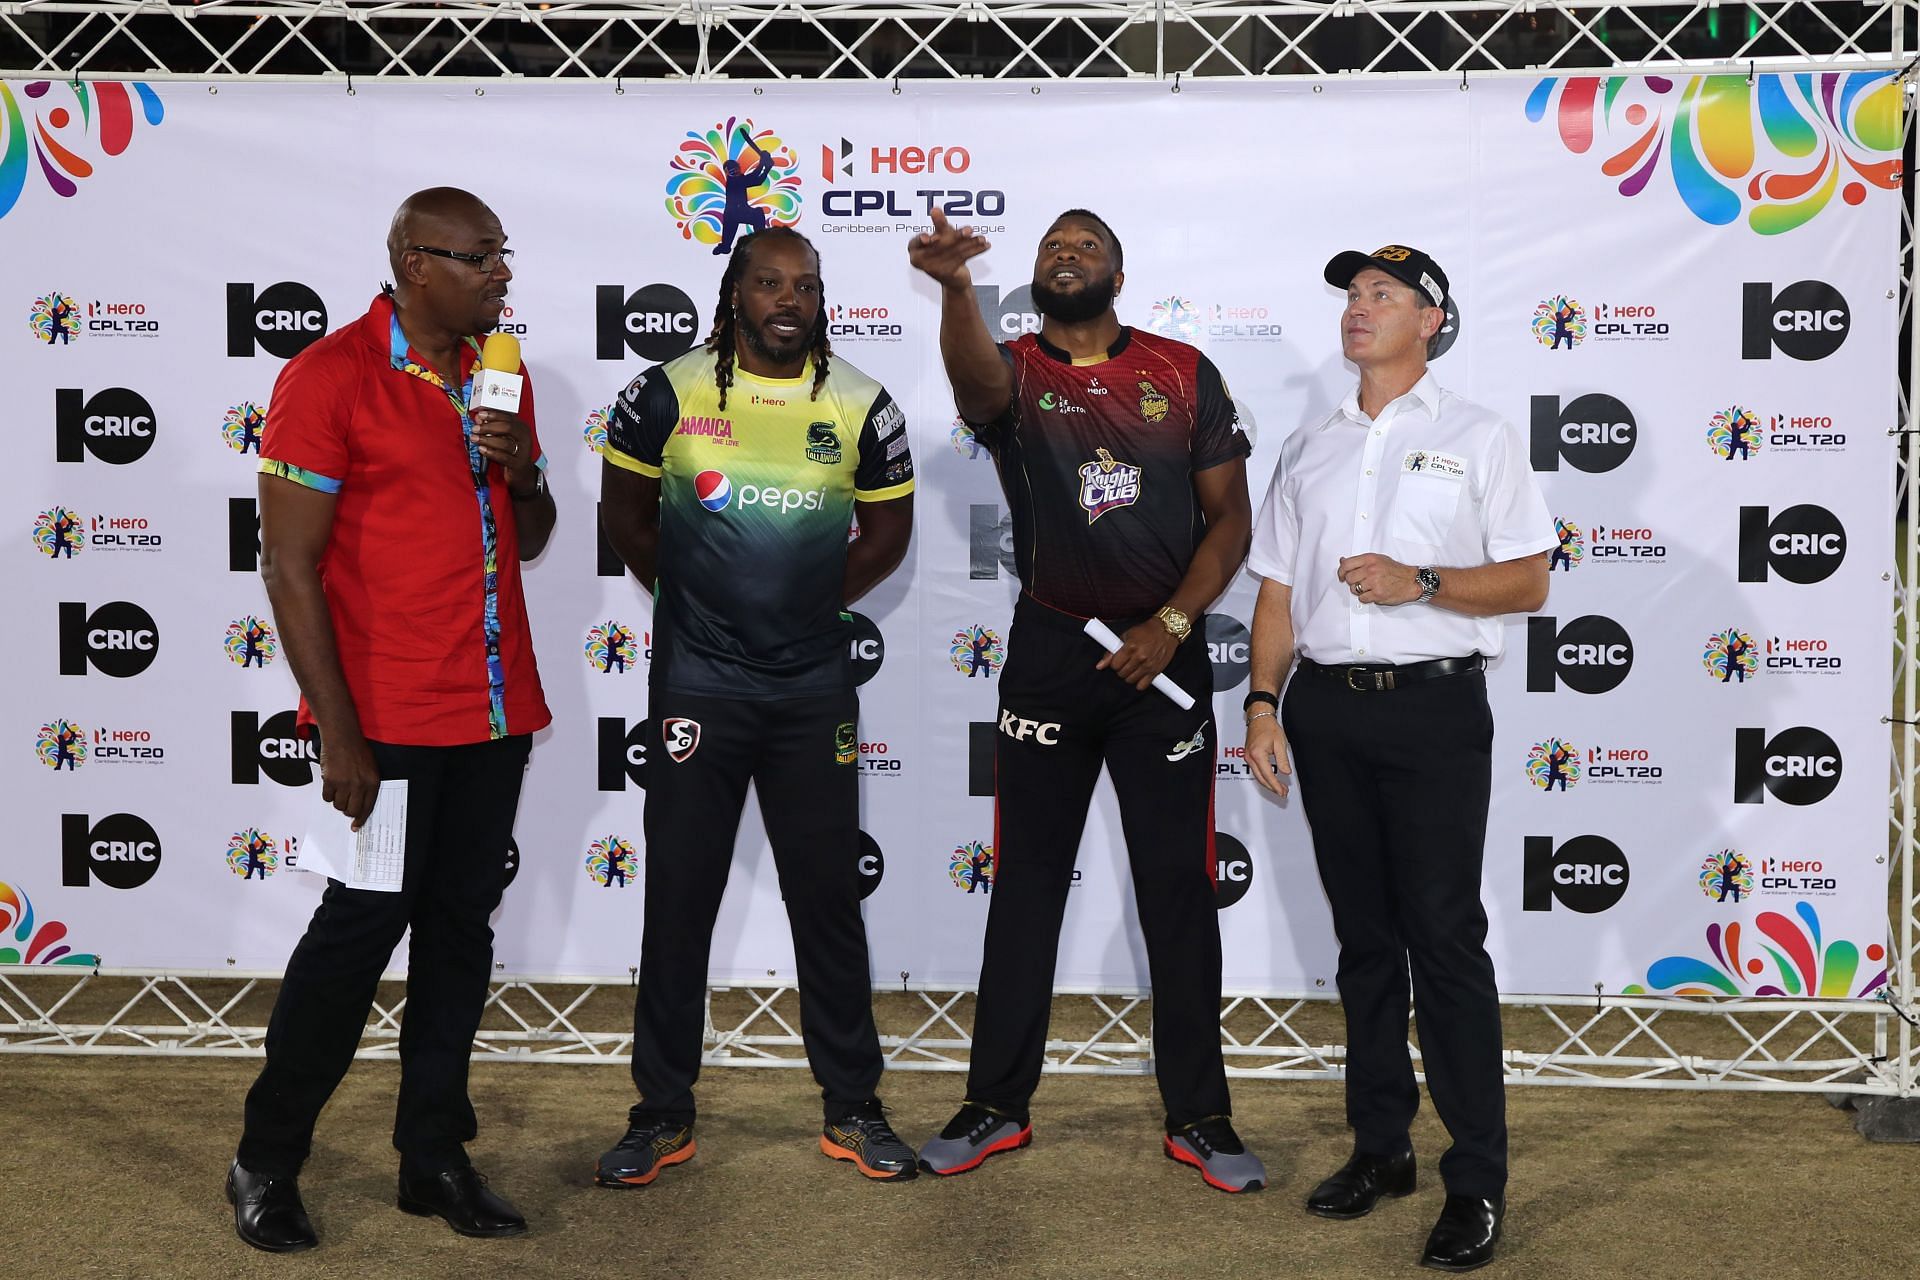 Some big names of West Indian cricket are likely to participate in the inaugural 6ixty competition (Image courtesy: CPL)